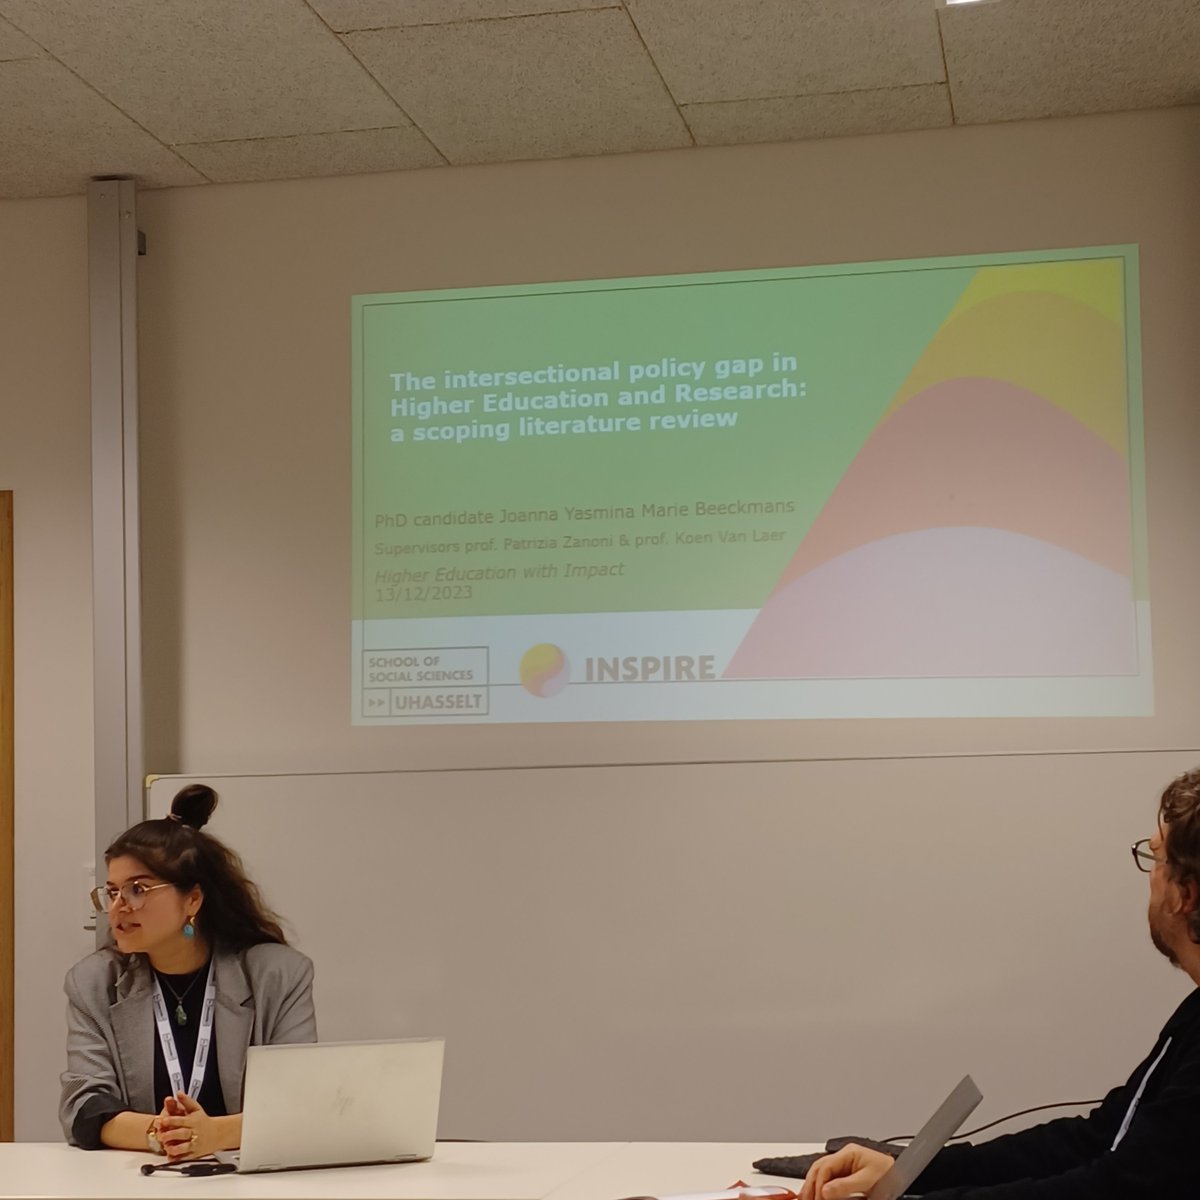 Great presentation at @uhasselt Higher Education with Impact conference by @BeeckmansJoanna on her literature review on intersectional policy in higher education & research - which is part of the @SSW_UHasselt & @SEINHasselt work in the @INSPIREquality_ project